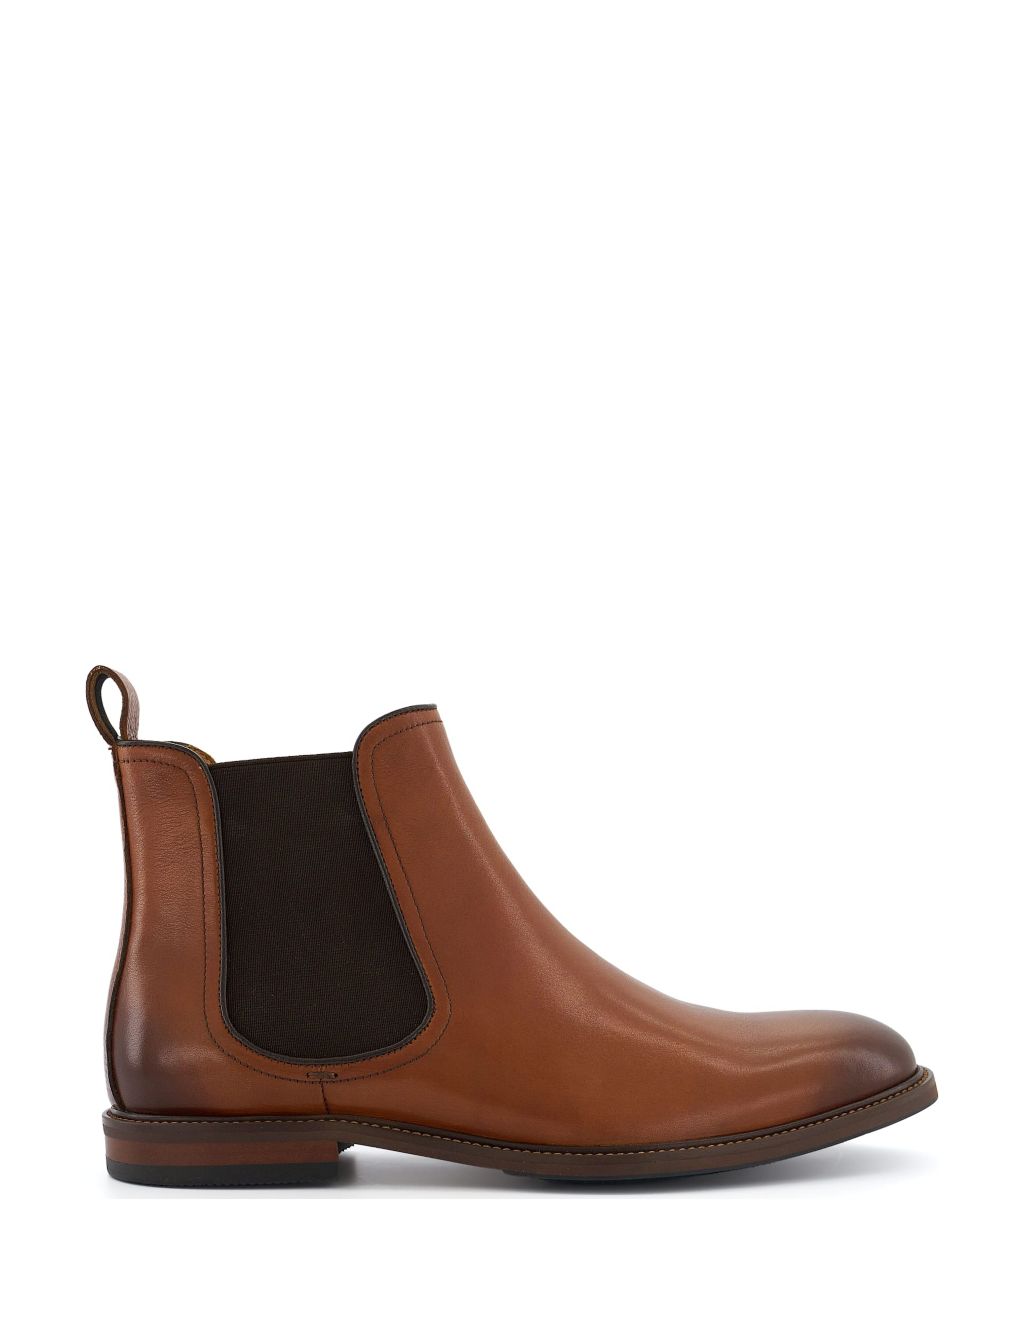 Buy Leather Chelsea Boots | Dune London | M&S